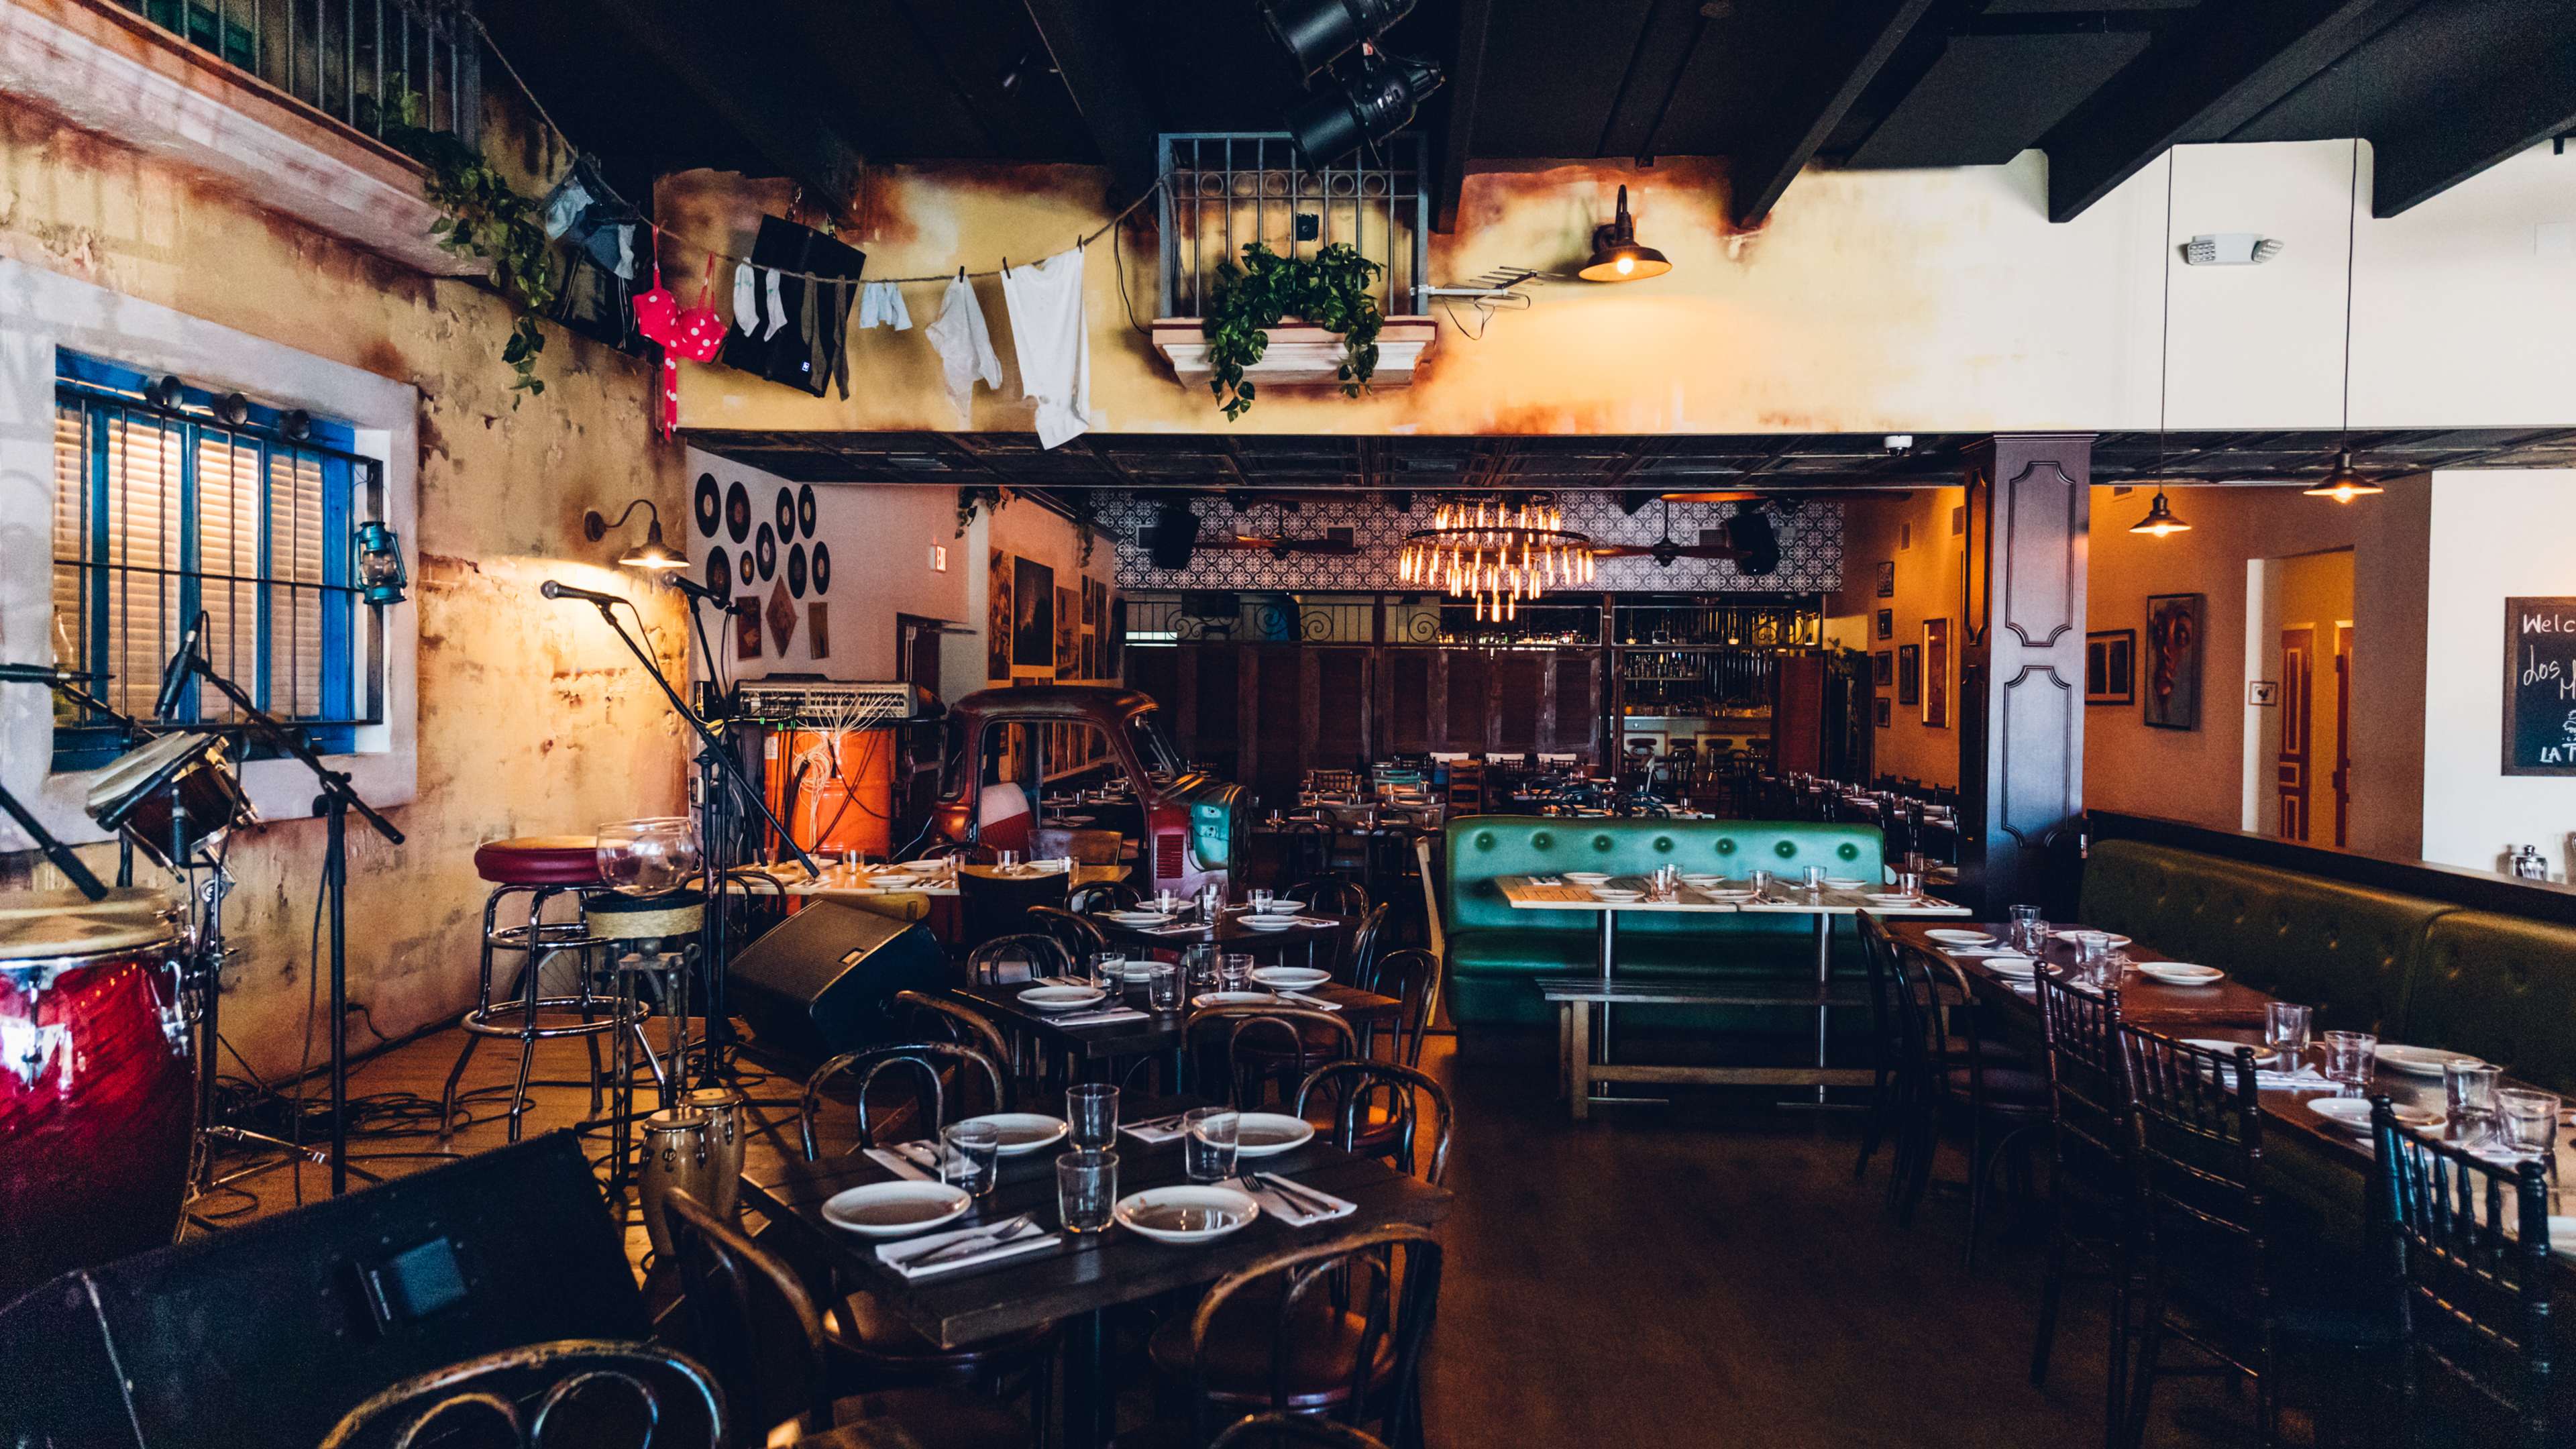 Restaurant interior with stage filled with instruments and rustic looking walls with vines.